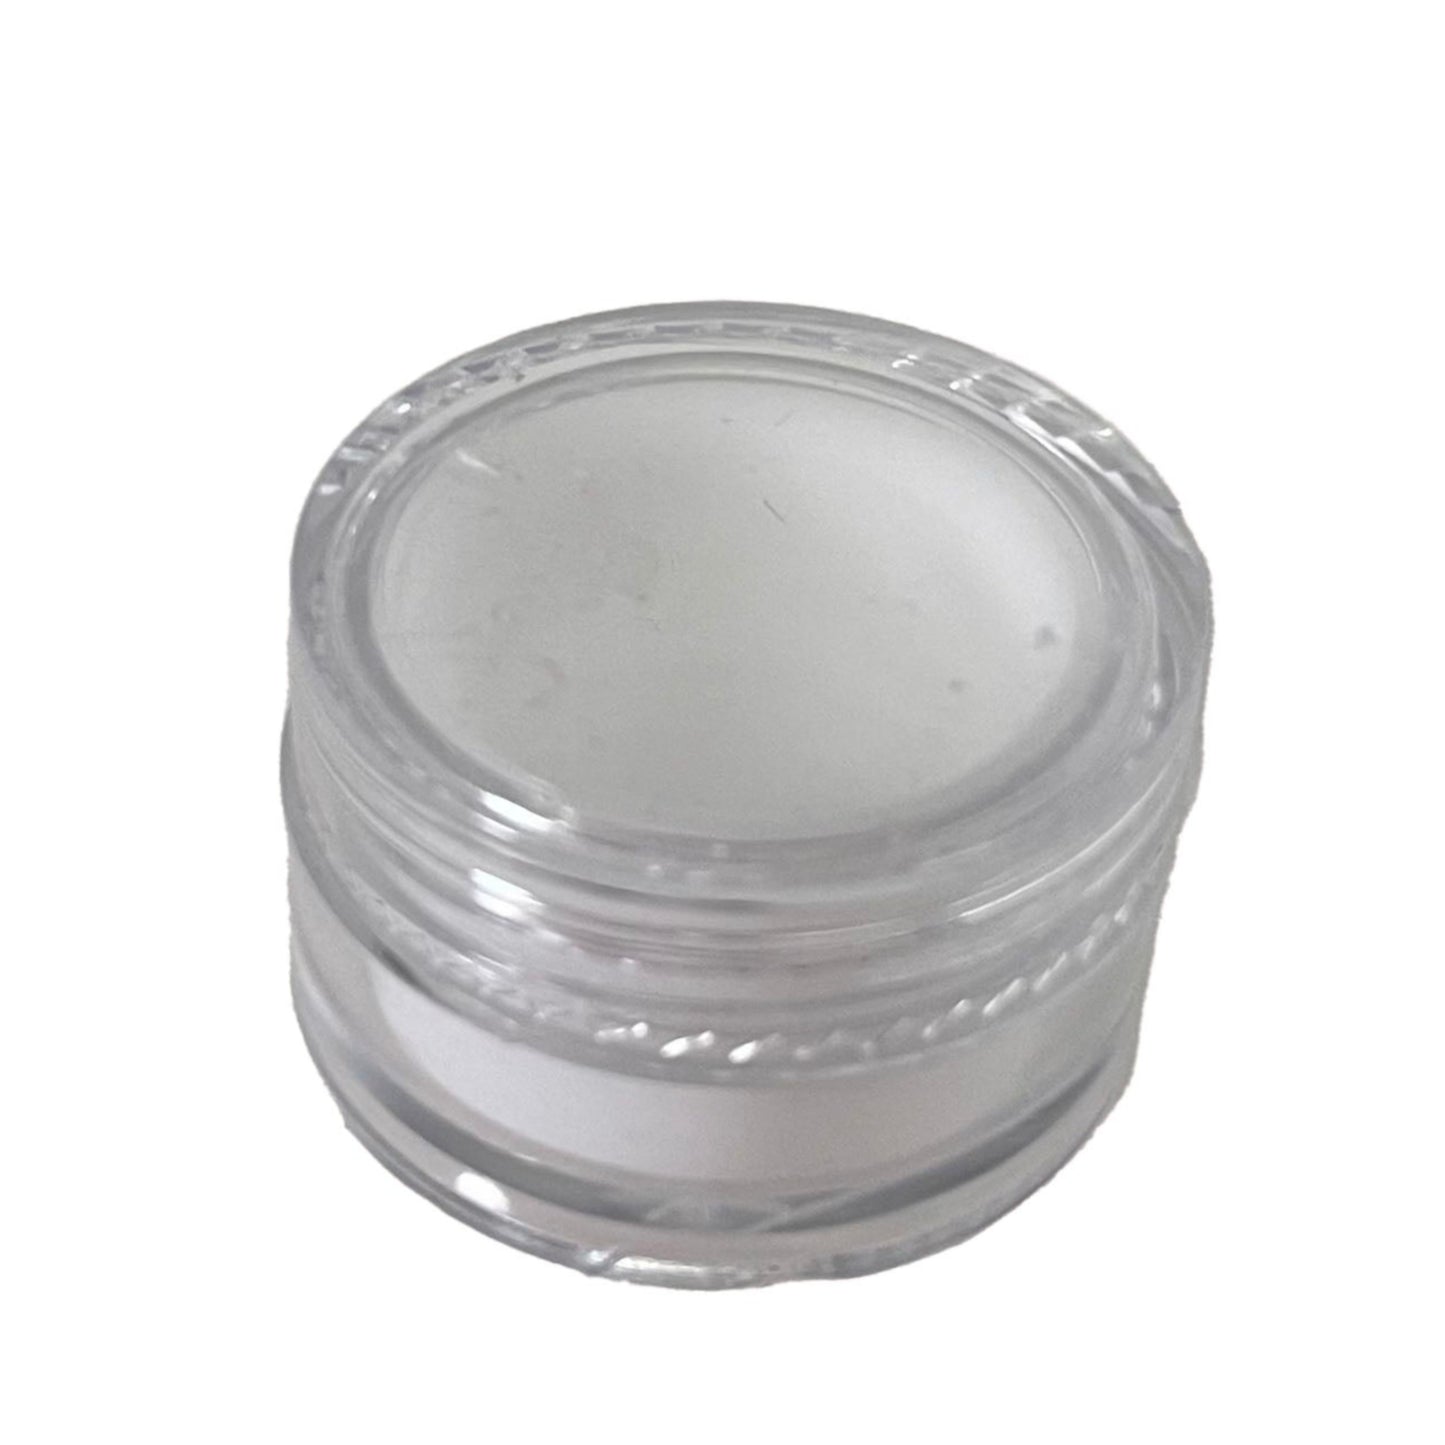 7 ml Plastic Jar with White Silicon Insert